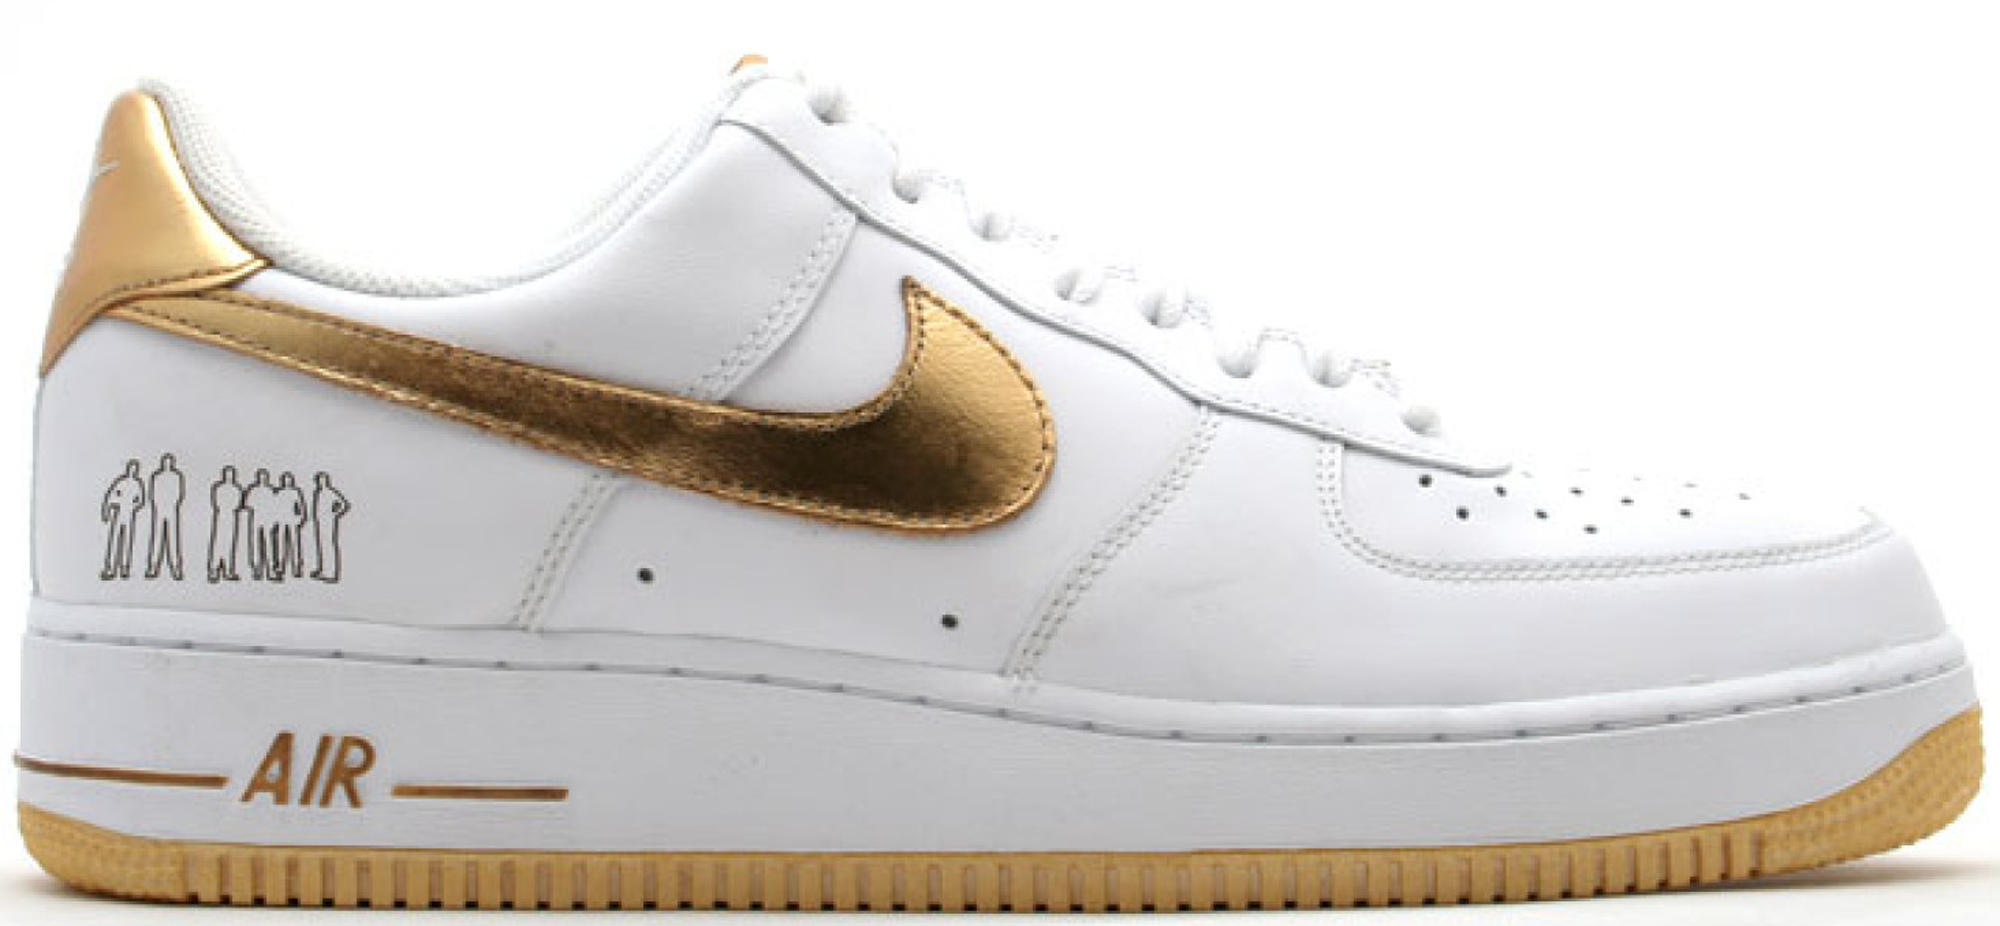 white and gold air force 1 low